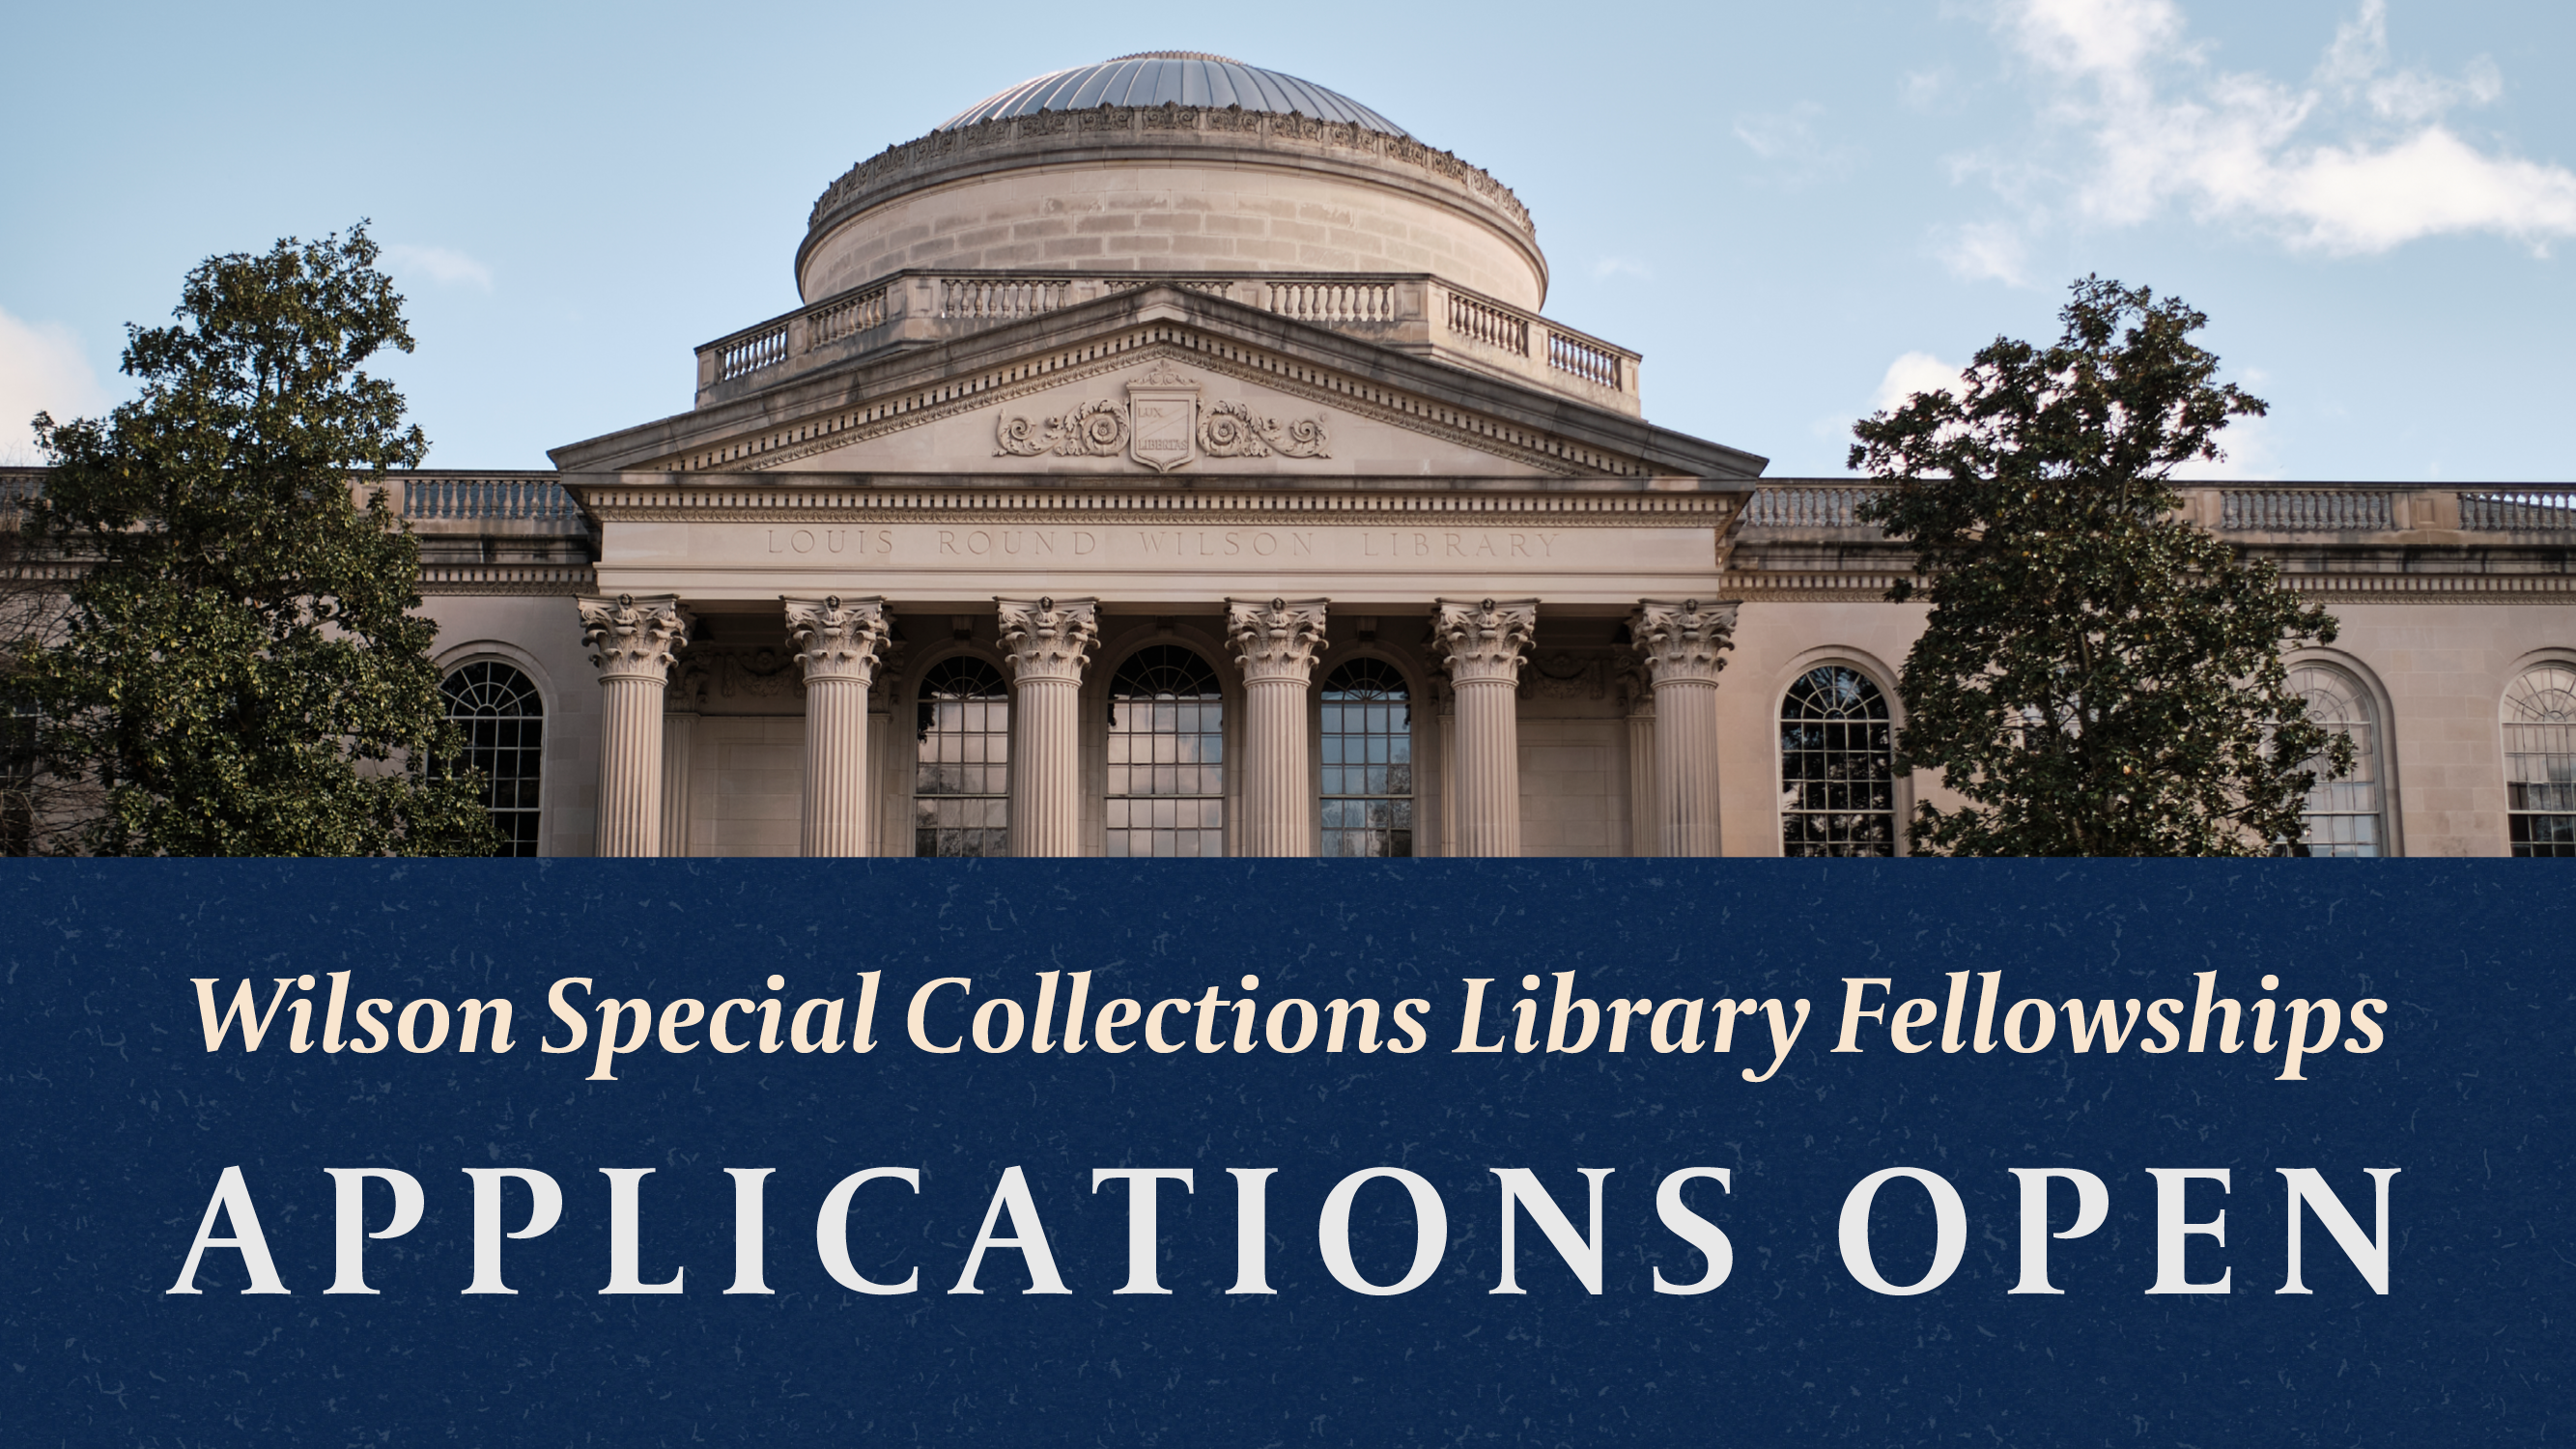 Apply now for special collections fellowships